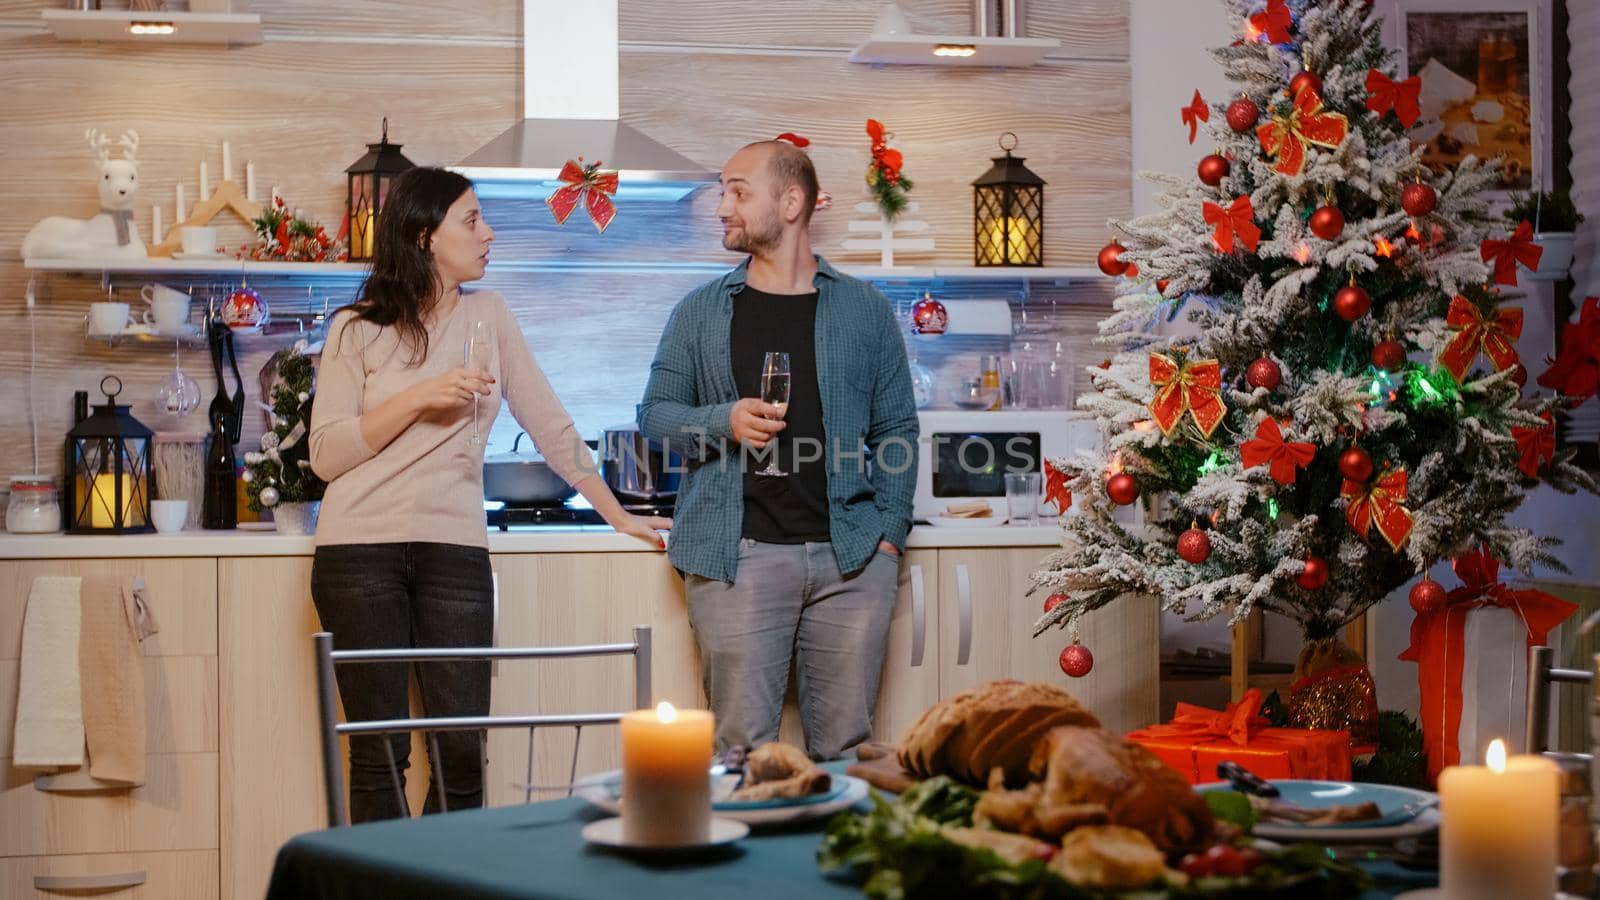 Festive couple standing and clinking glasses of champagne after enjoying christmas eve dinner. Man and woman chatting in decorated kitchen for seasonal holiday celebration. People celebrating